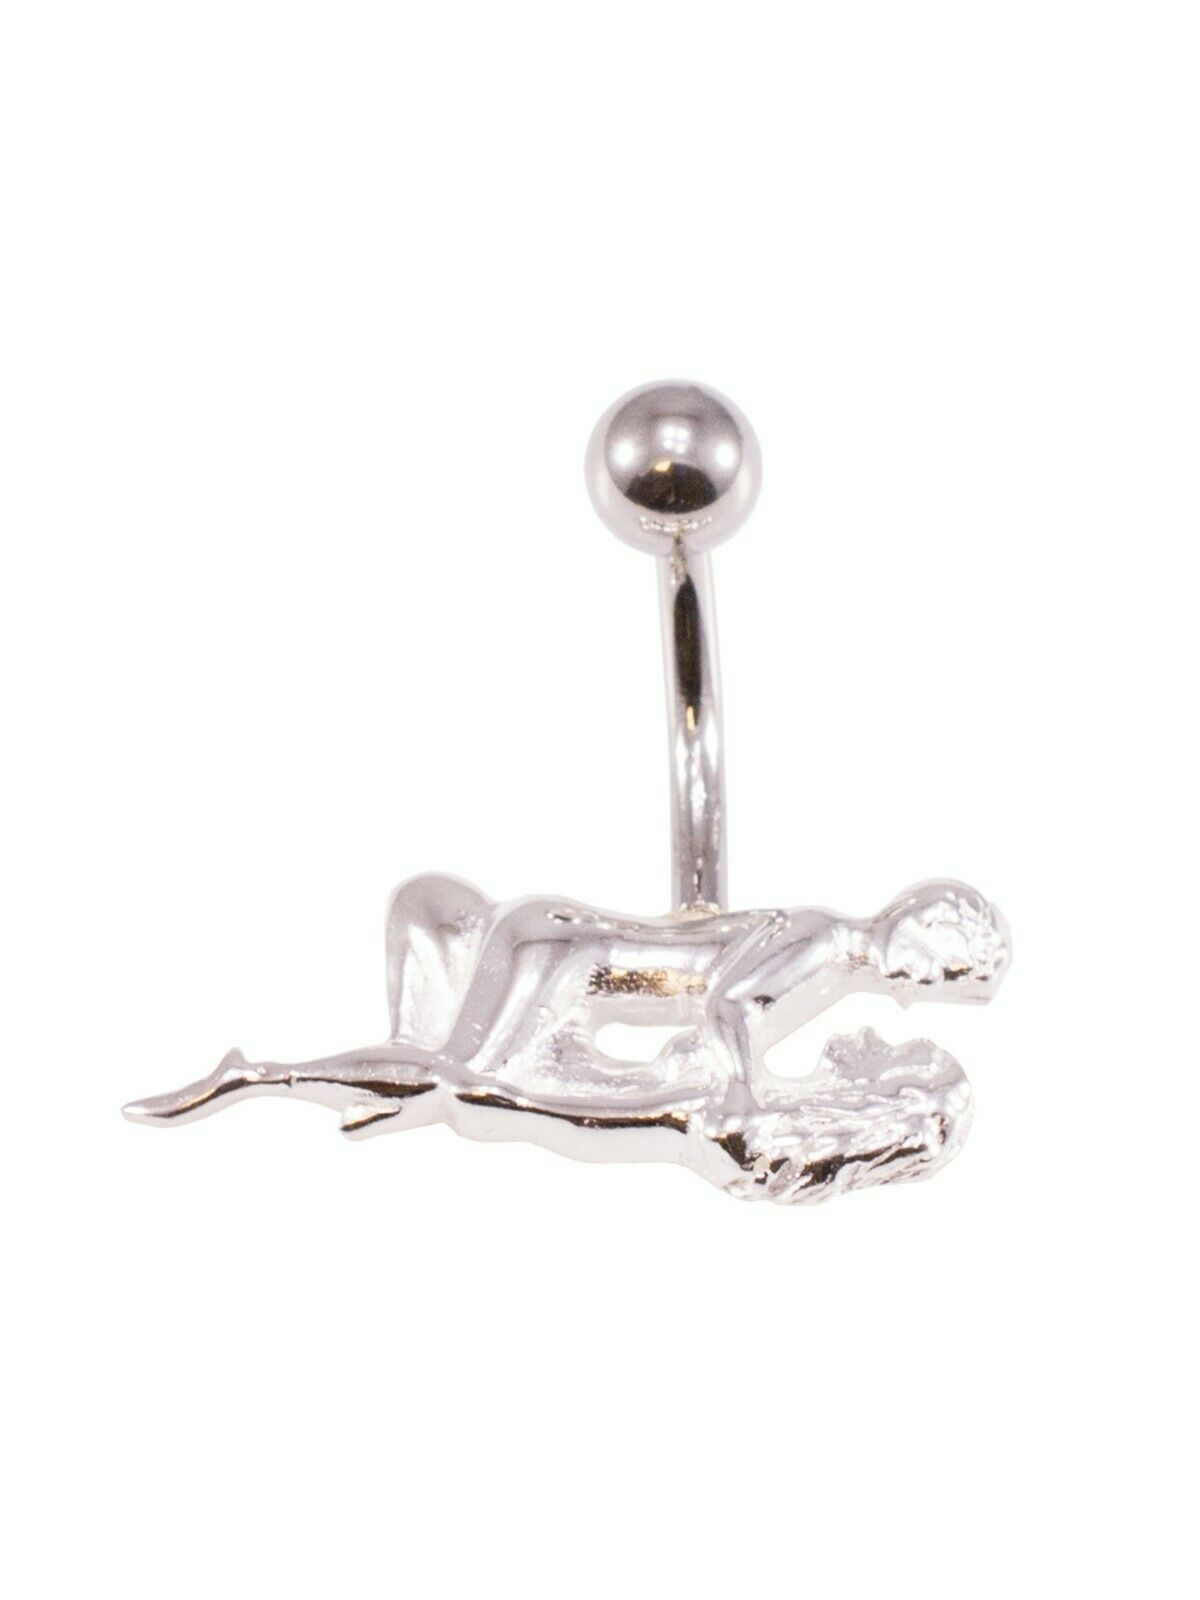 Belly Button Ring Kama Sutra Non Dangle 14ga Surgical Steel